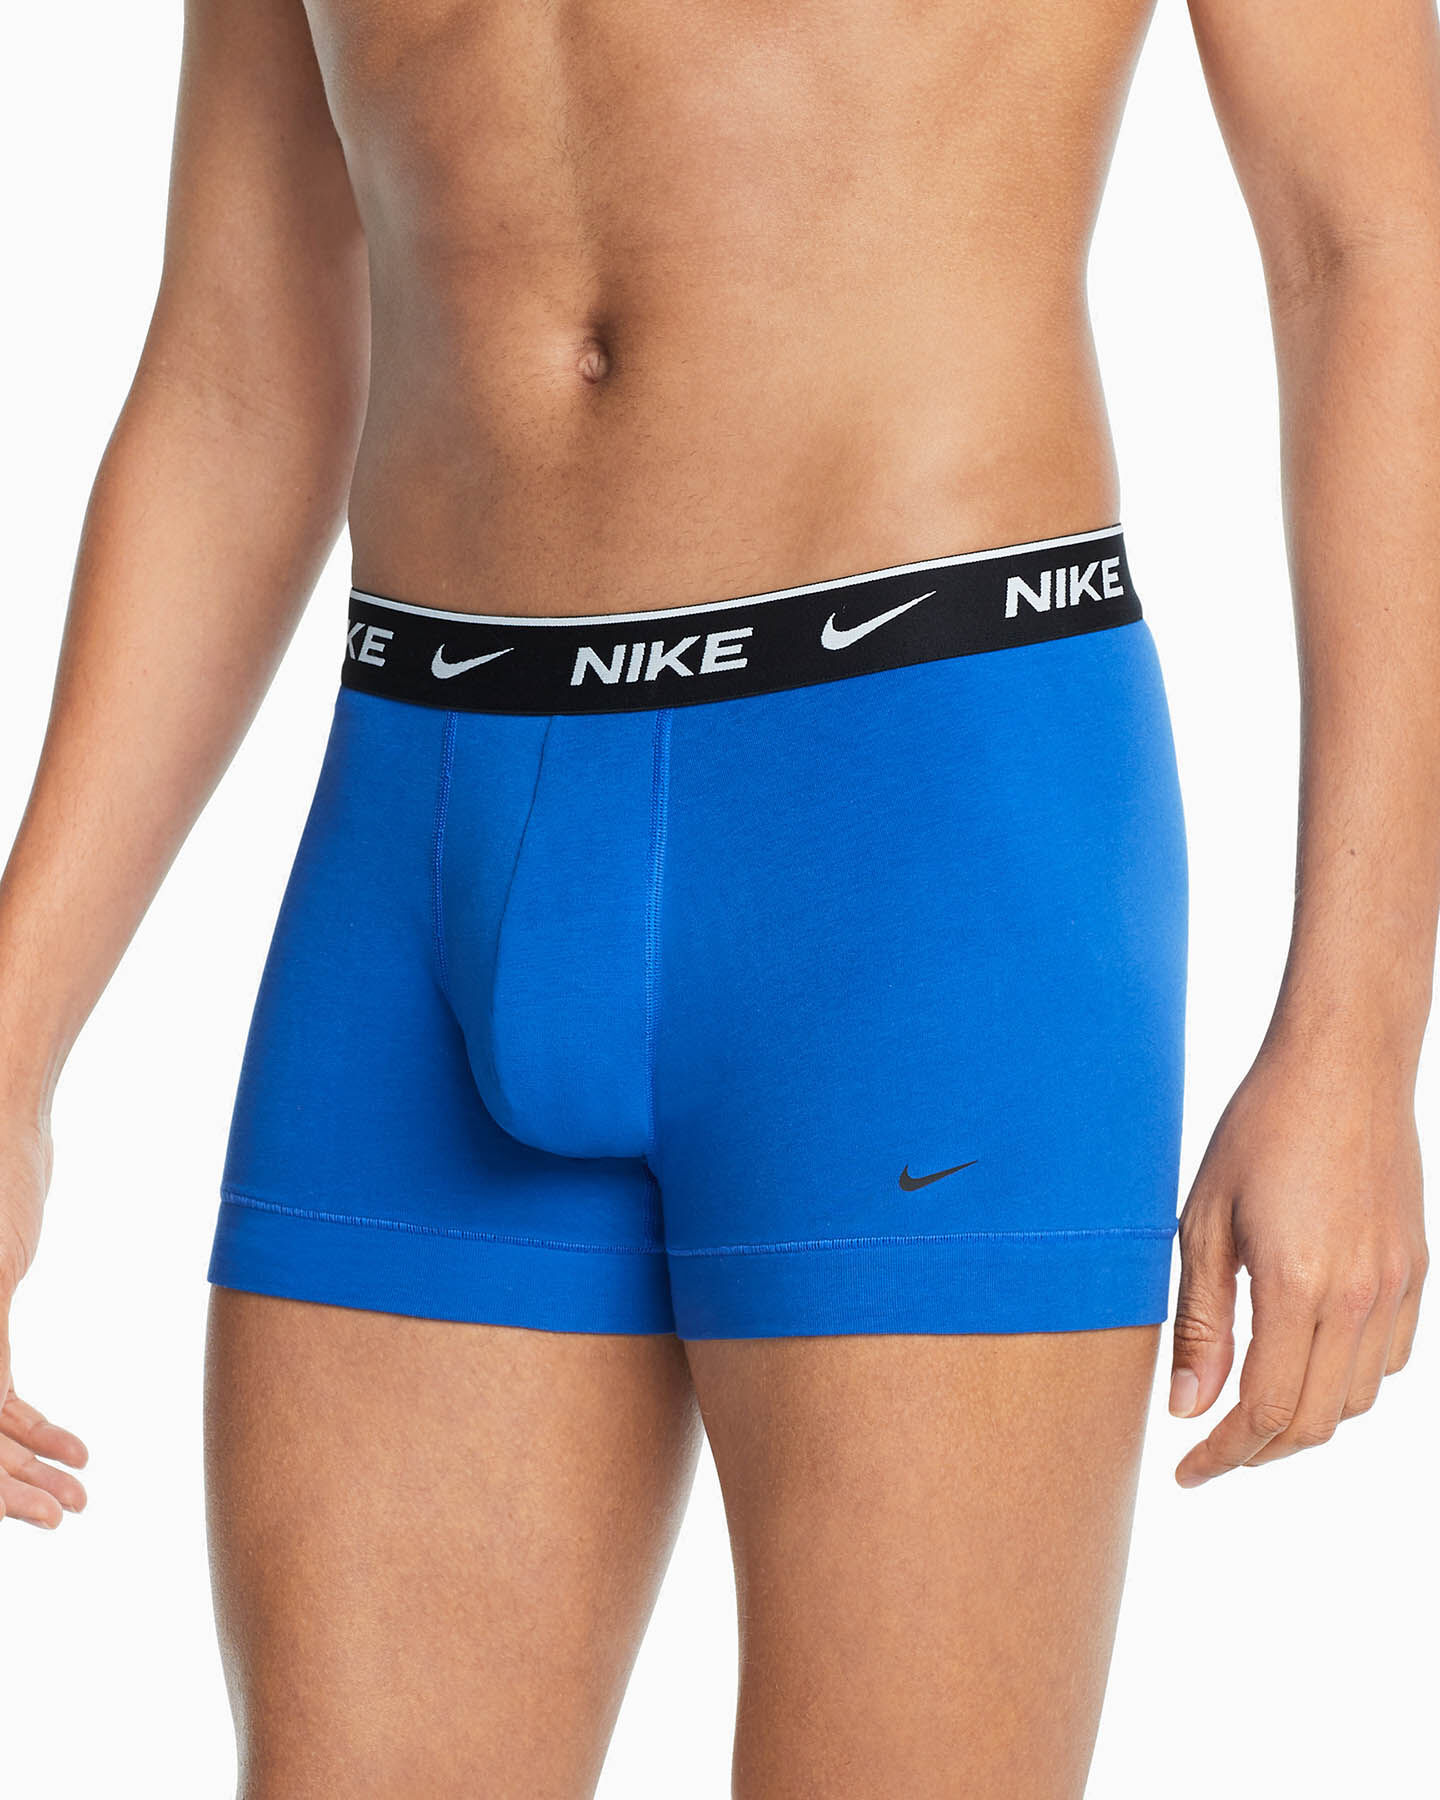  Intimo NIKE 2PACK BOXER EVERYDAY M S4099900|WNC|S scatto 1